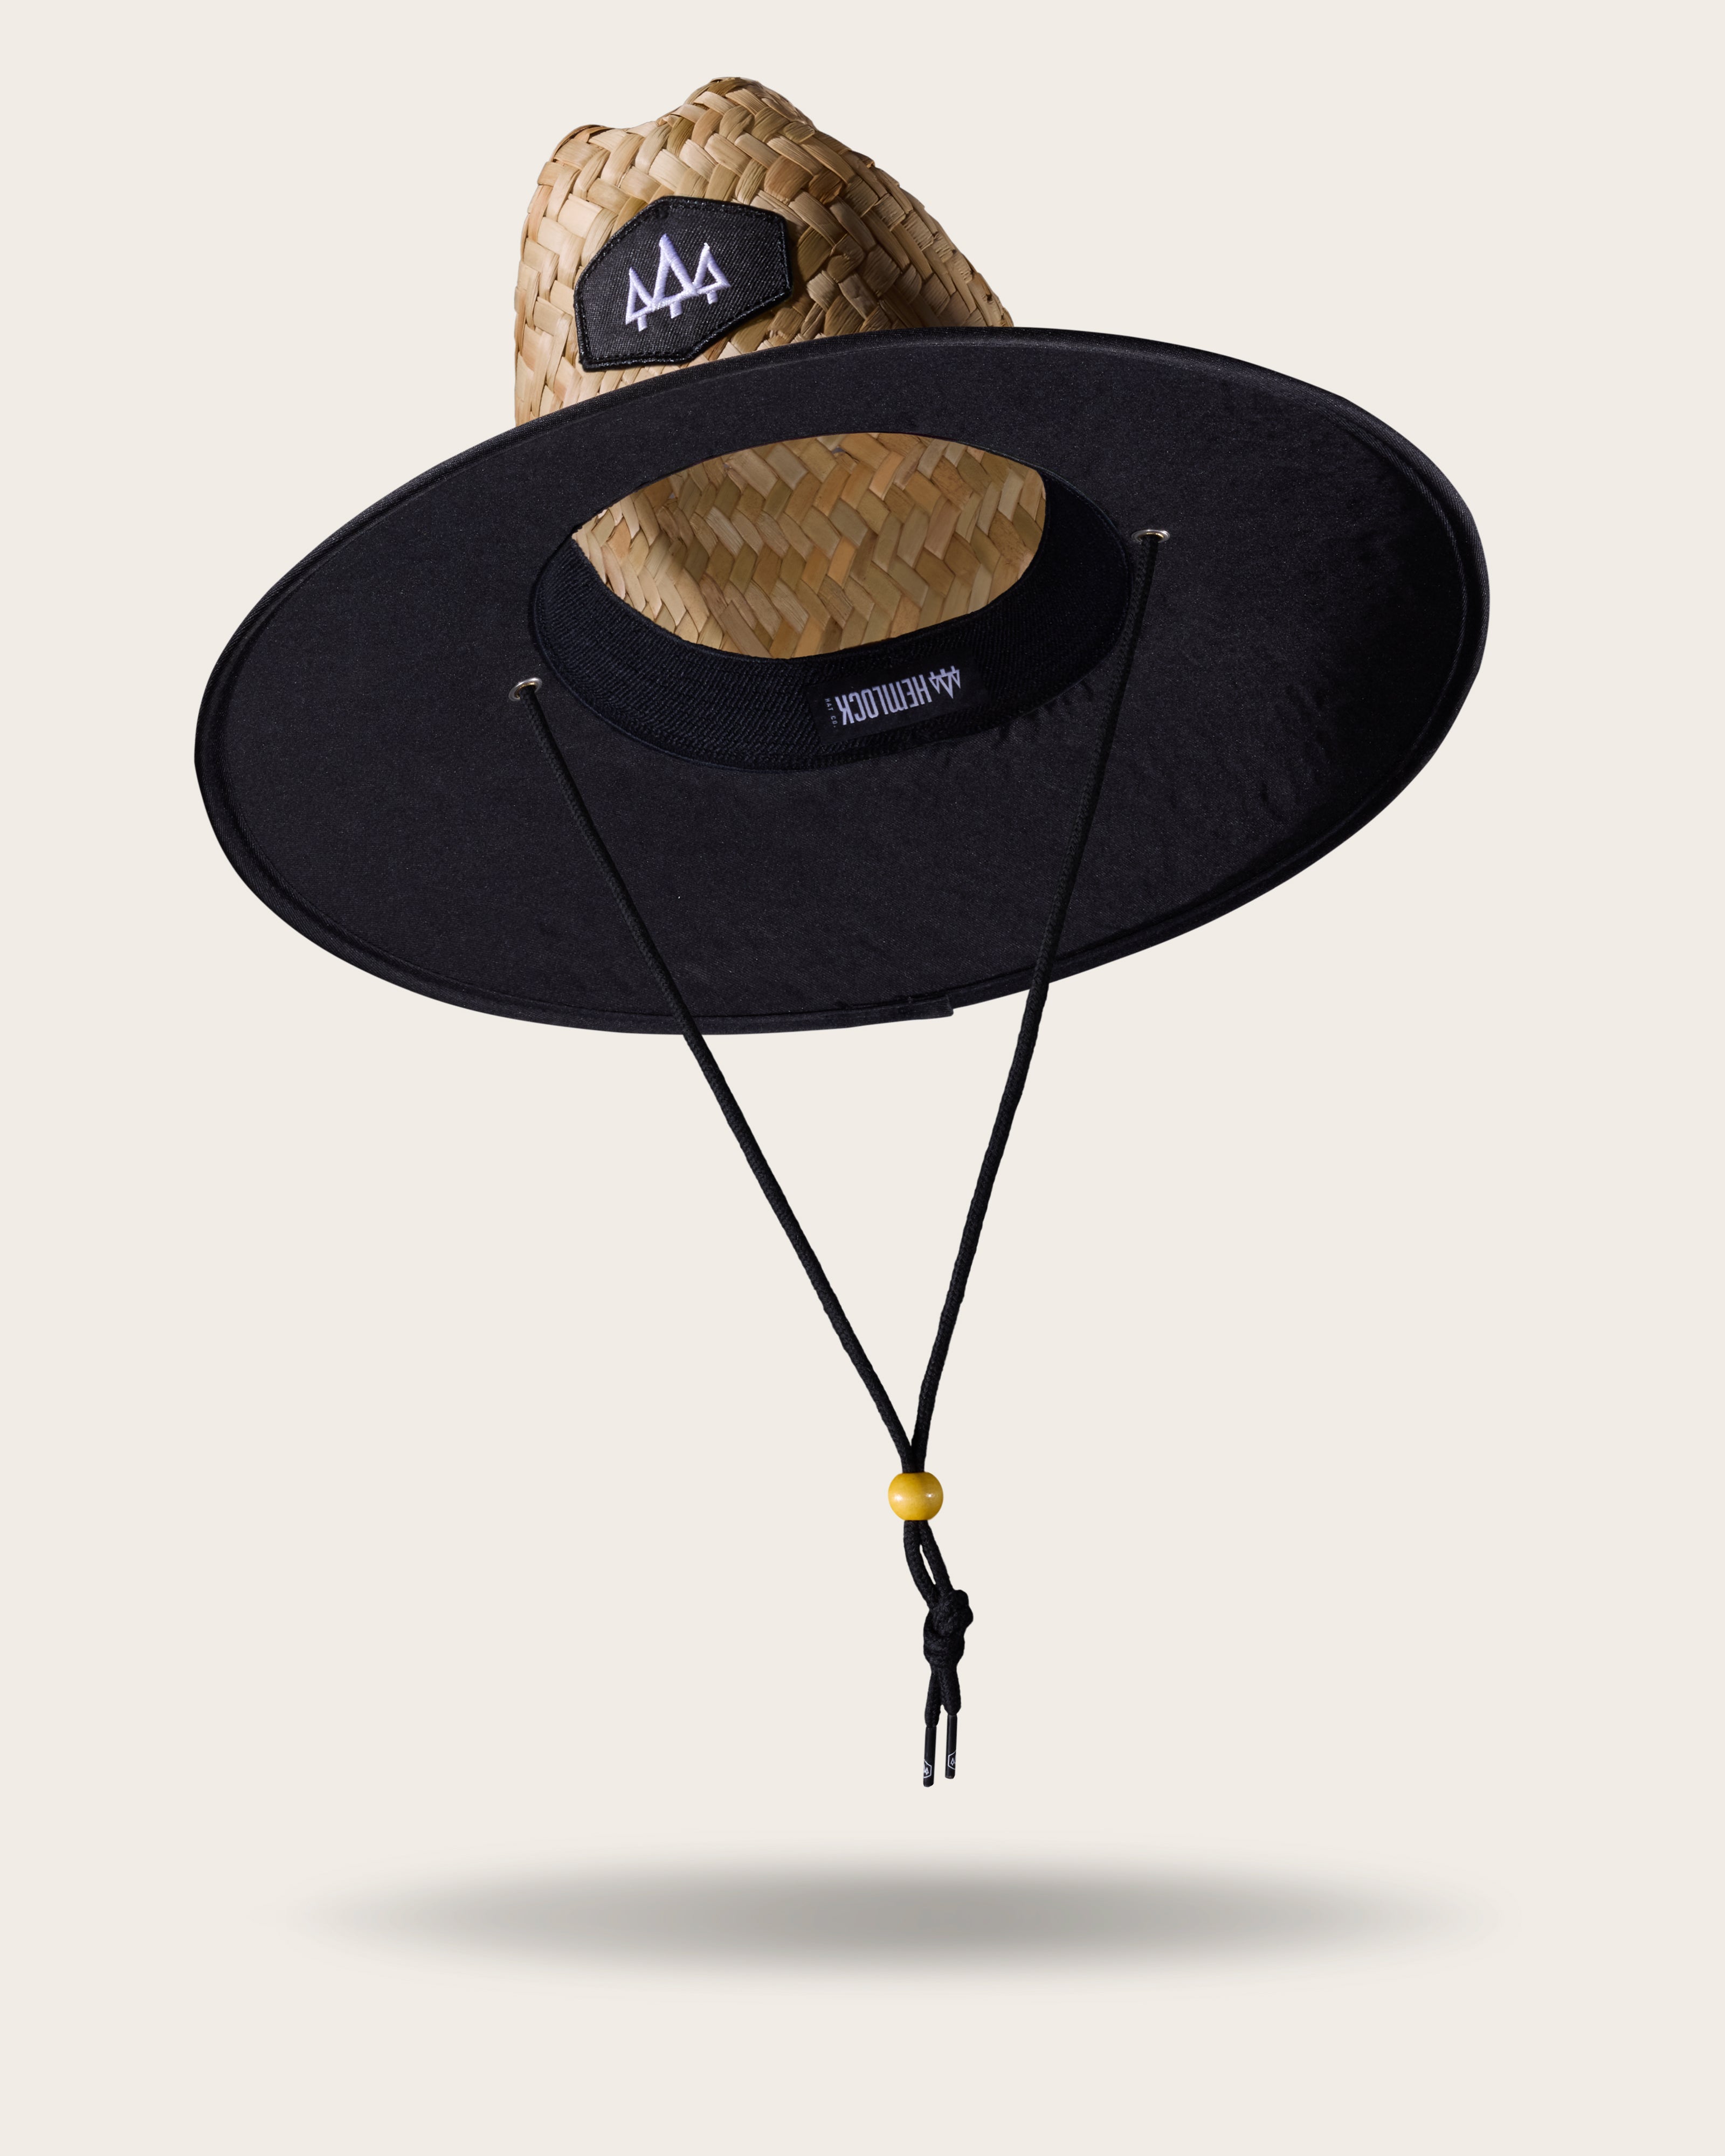 Hemlock Blackout straw lifeguard hat with Black color